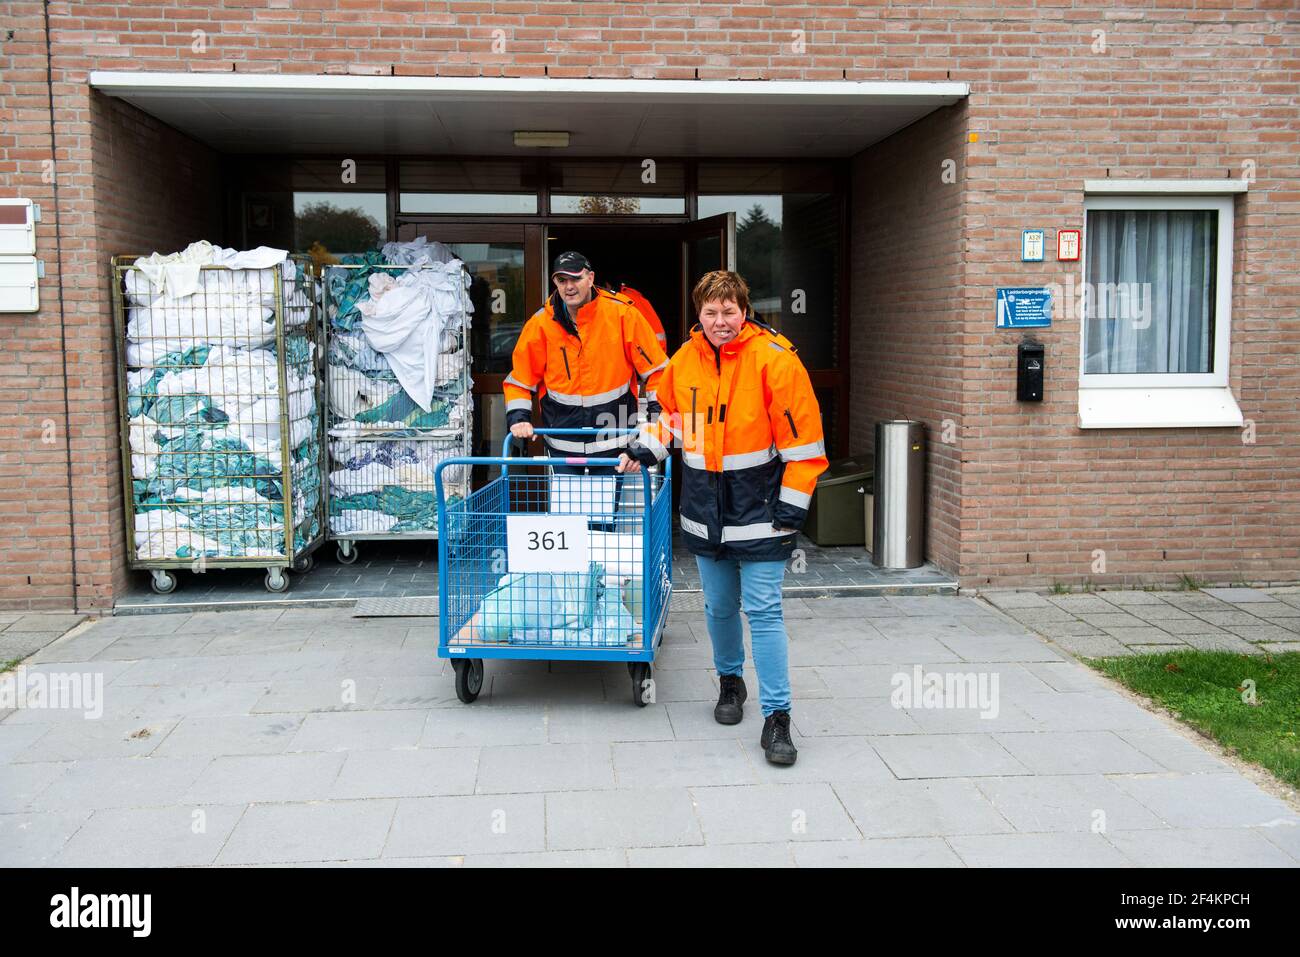 Airbase, Gilze-Rijen, Netherlands. Multiple mentally challenged civilian employees of a Dutch Airbase taking care of laundry at the Dutch airforce base. Stock Photo